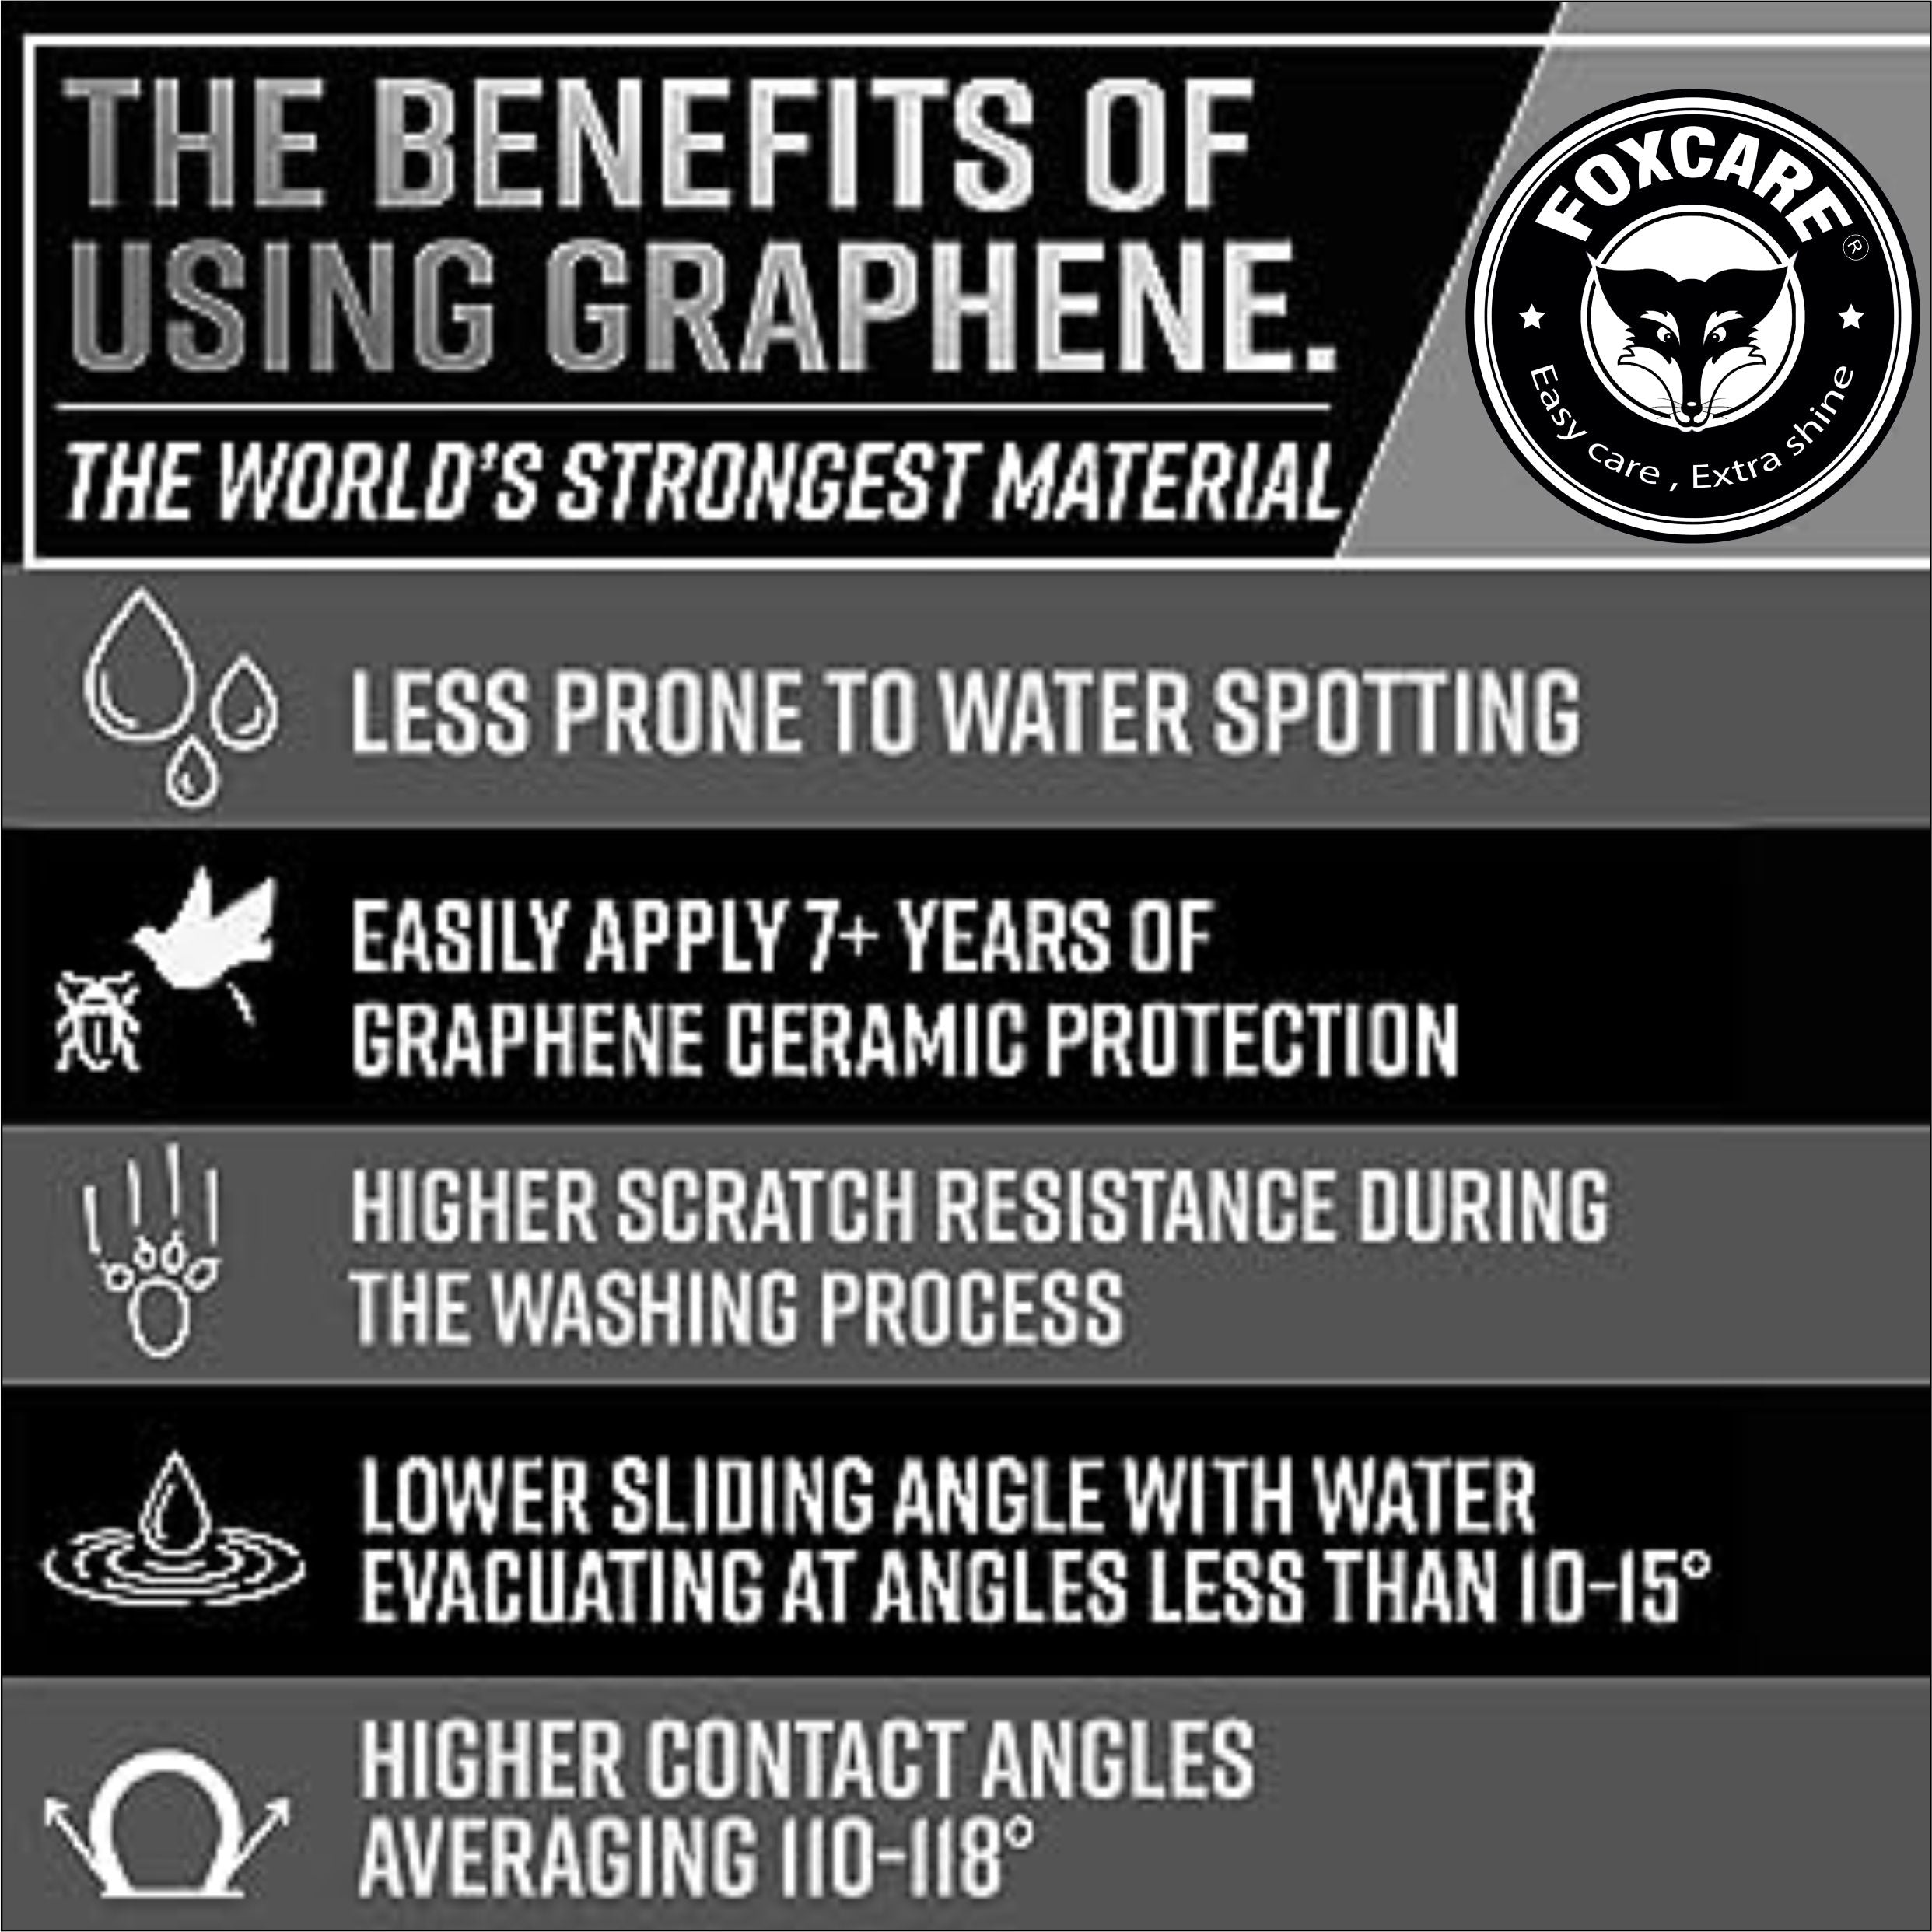 Foxcare Graphene spray Guard for Car | Hydrophobic Spray With Extreme Gloss, Slickness & UV Protection - Graphene Spray Guard Is More Durable Than Car Polish, Wax Or Any Ceramic Coating For Car -200ML